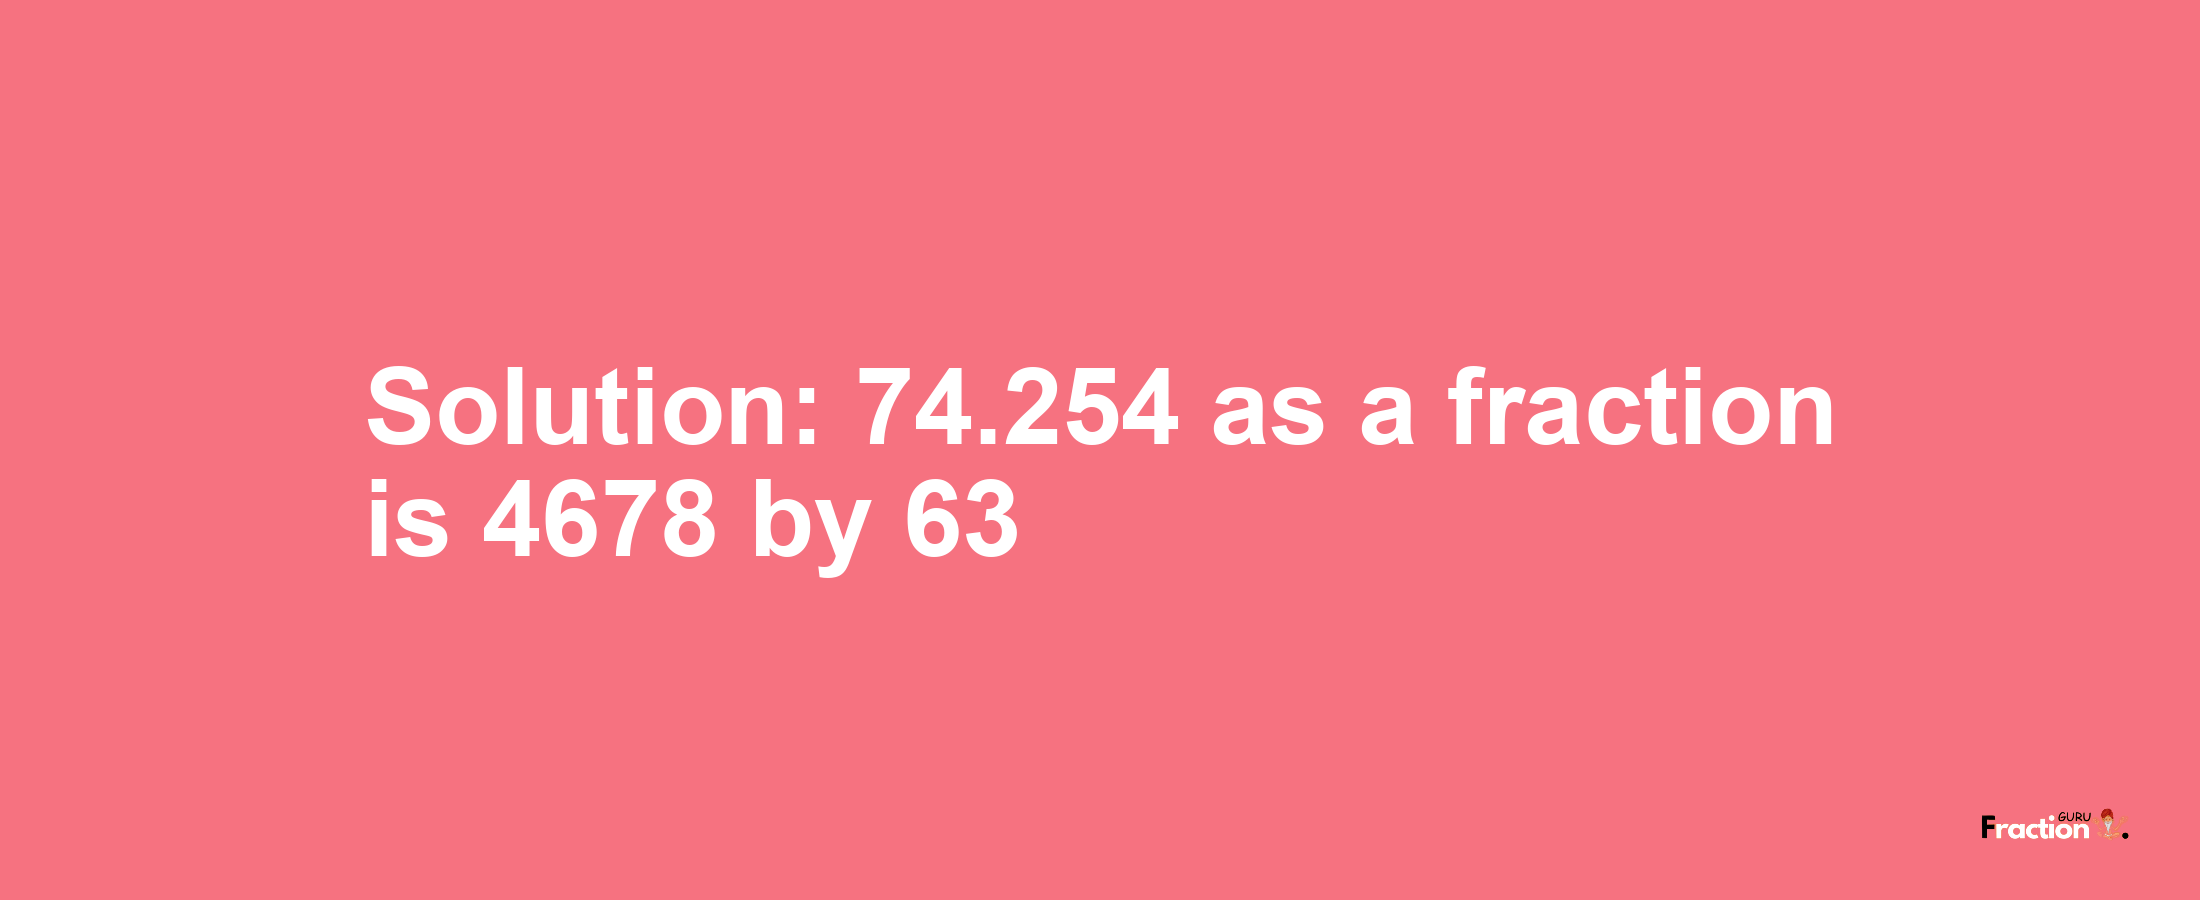 Solution:74.254 as a fraction is 4678/63